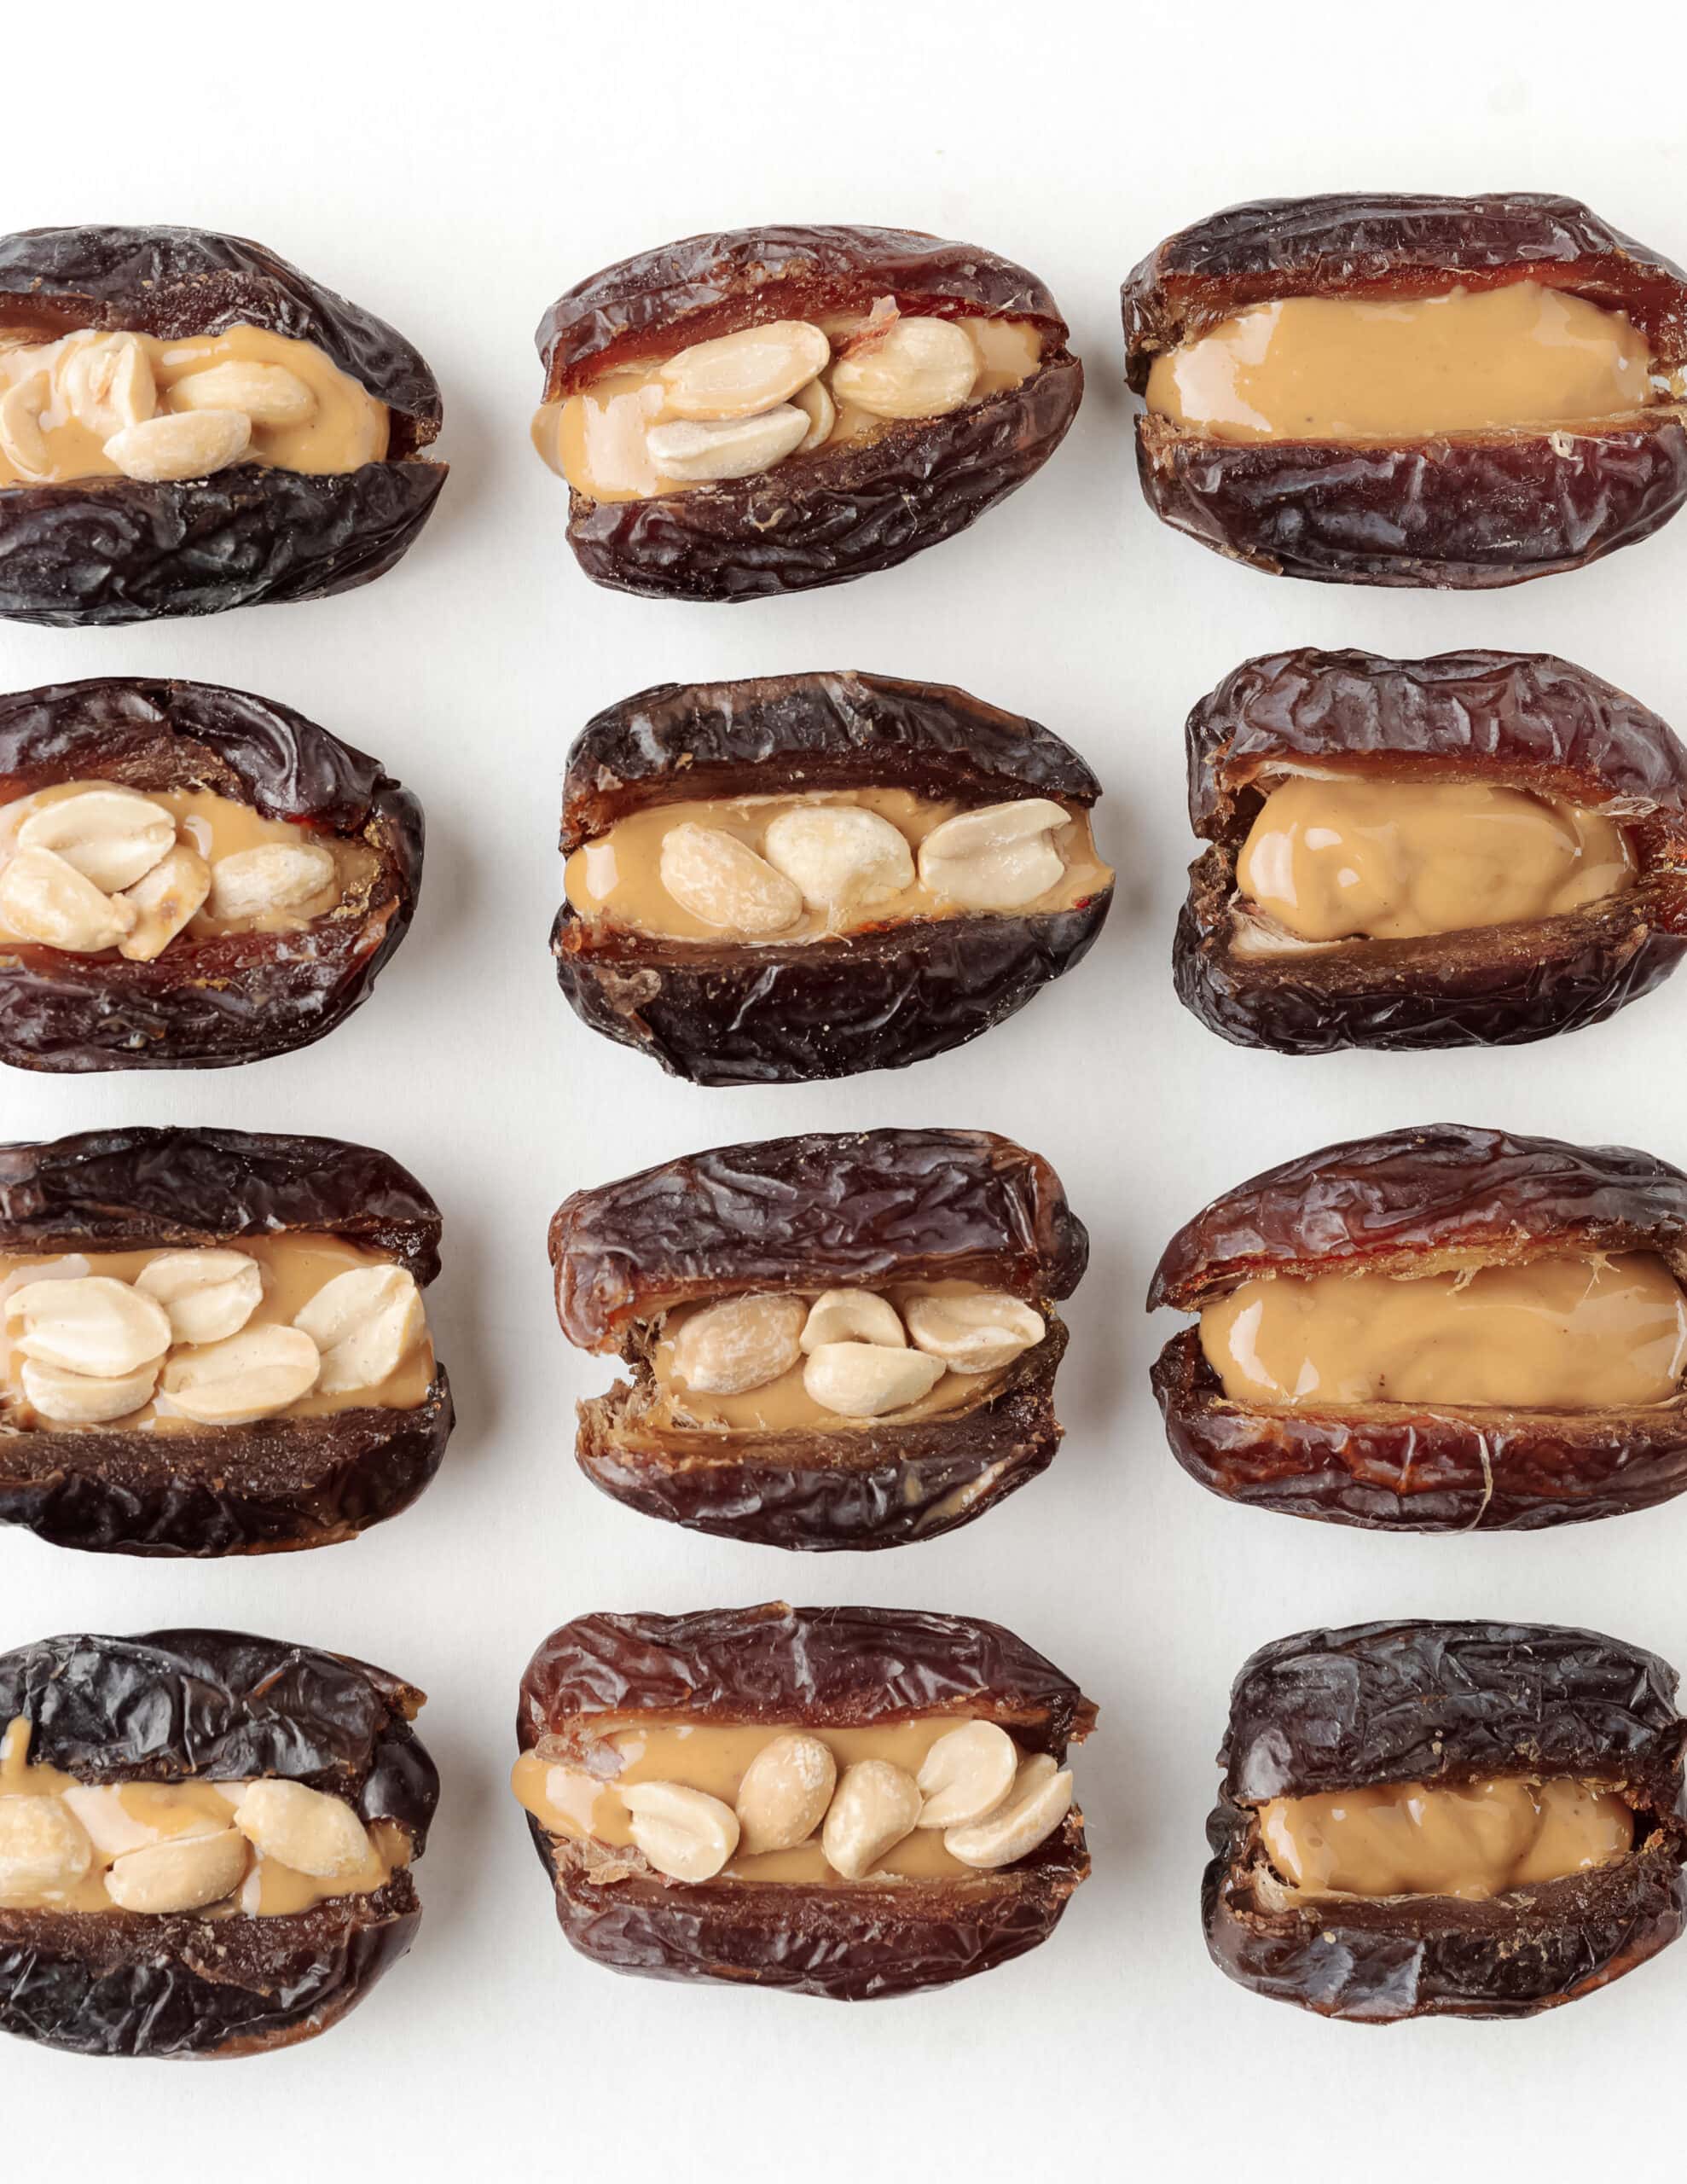 Dates that are split open stuffed with peanut butter and choppe peanuts,